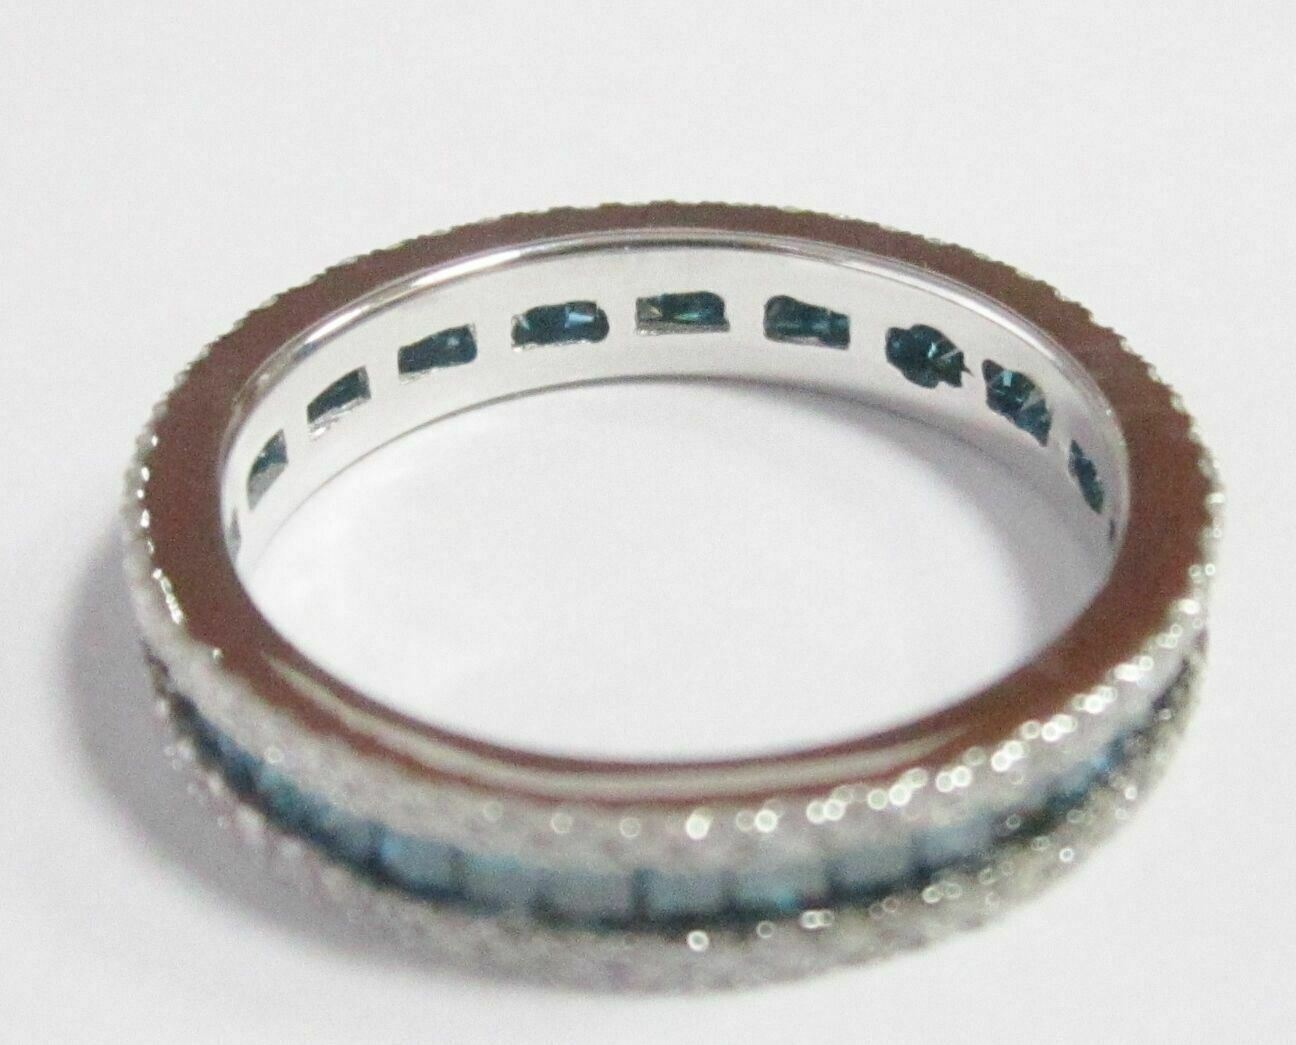 1.75 TCW Natural Round Cut Blue Diamond Eternity Band/Ring Size 5.5 14k W-Gold